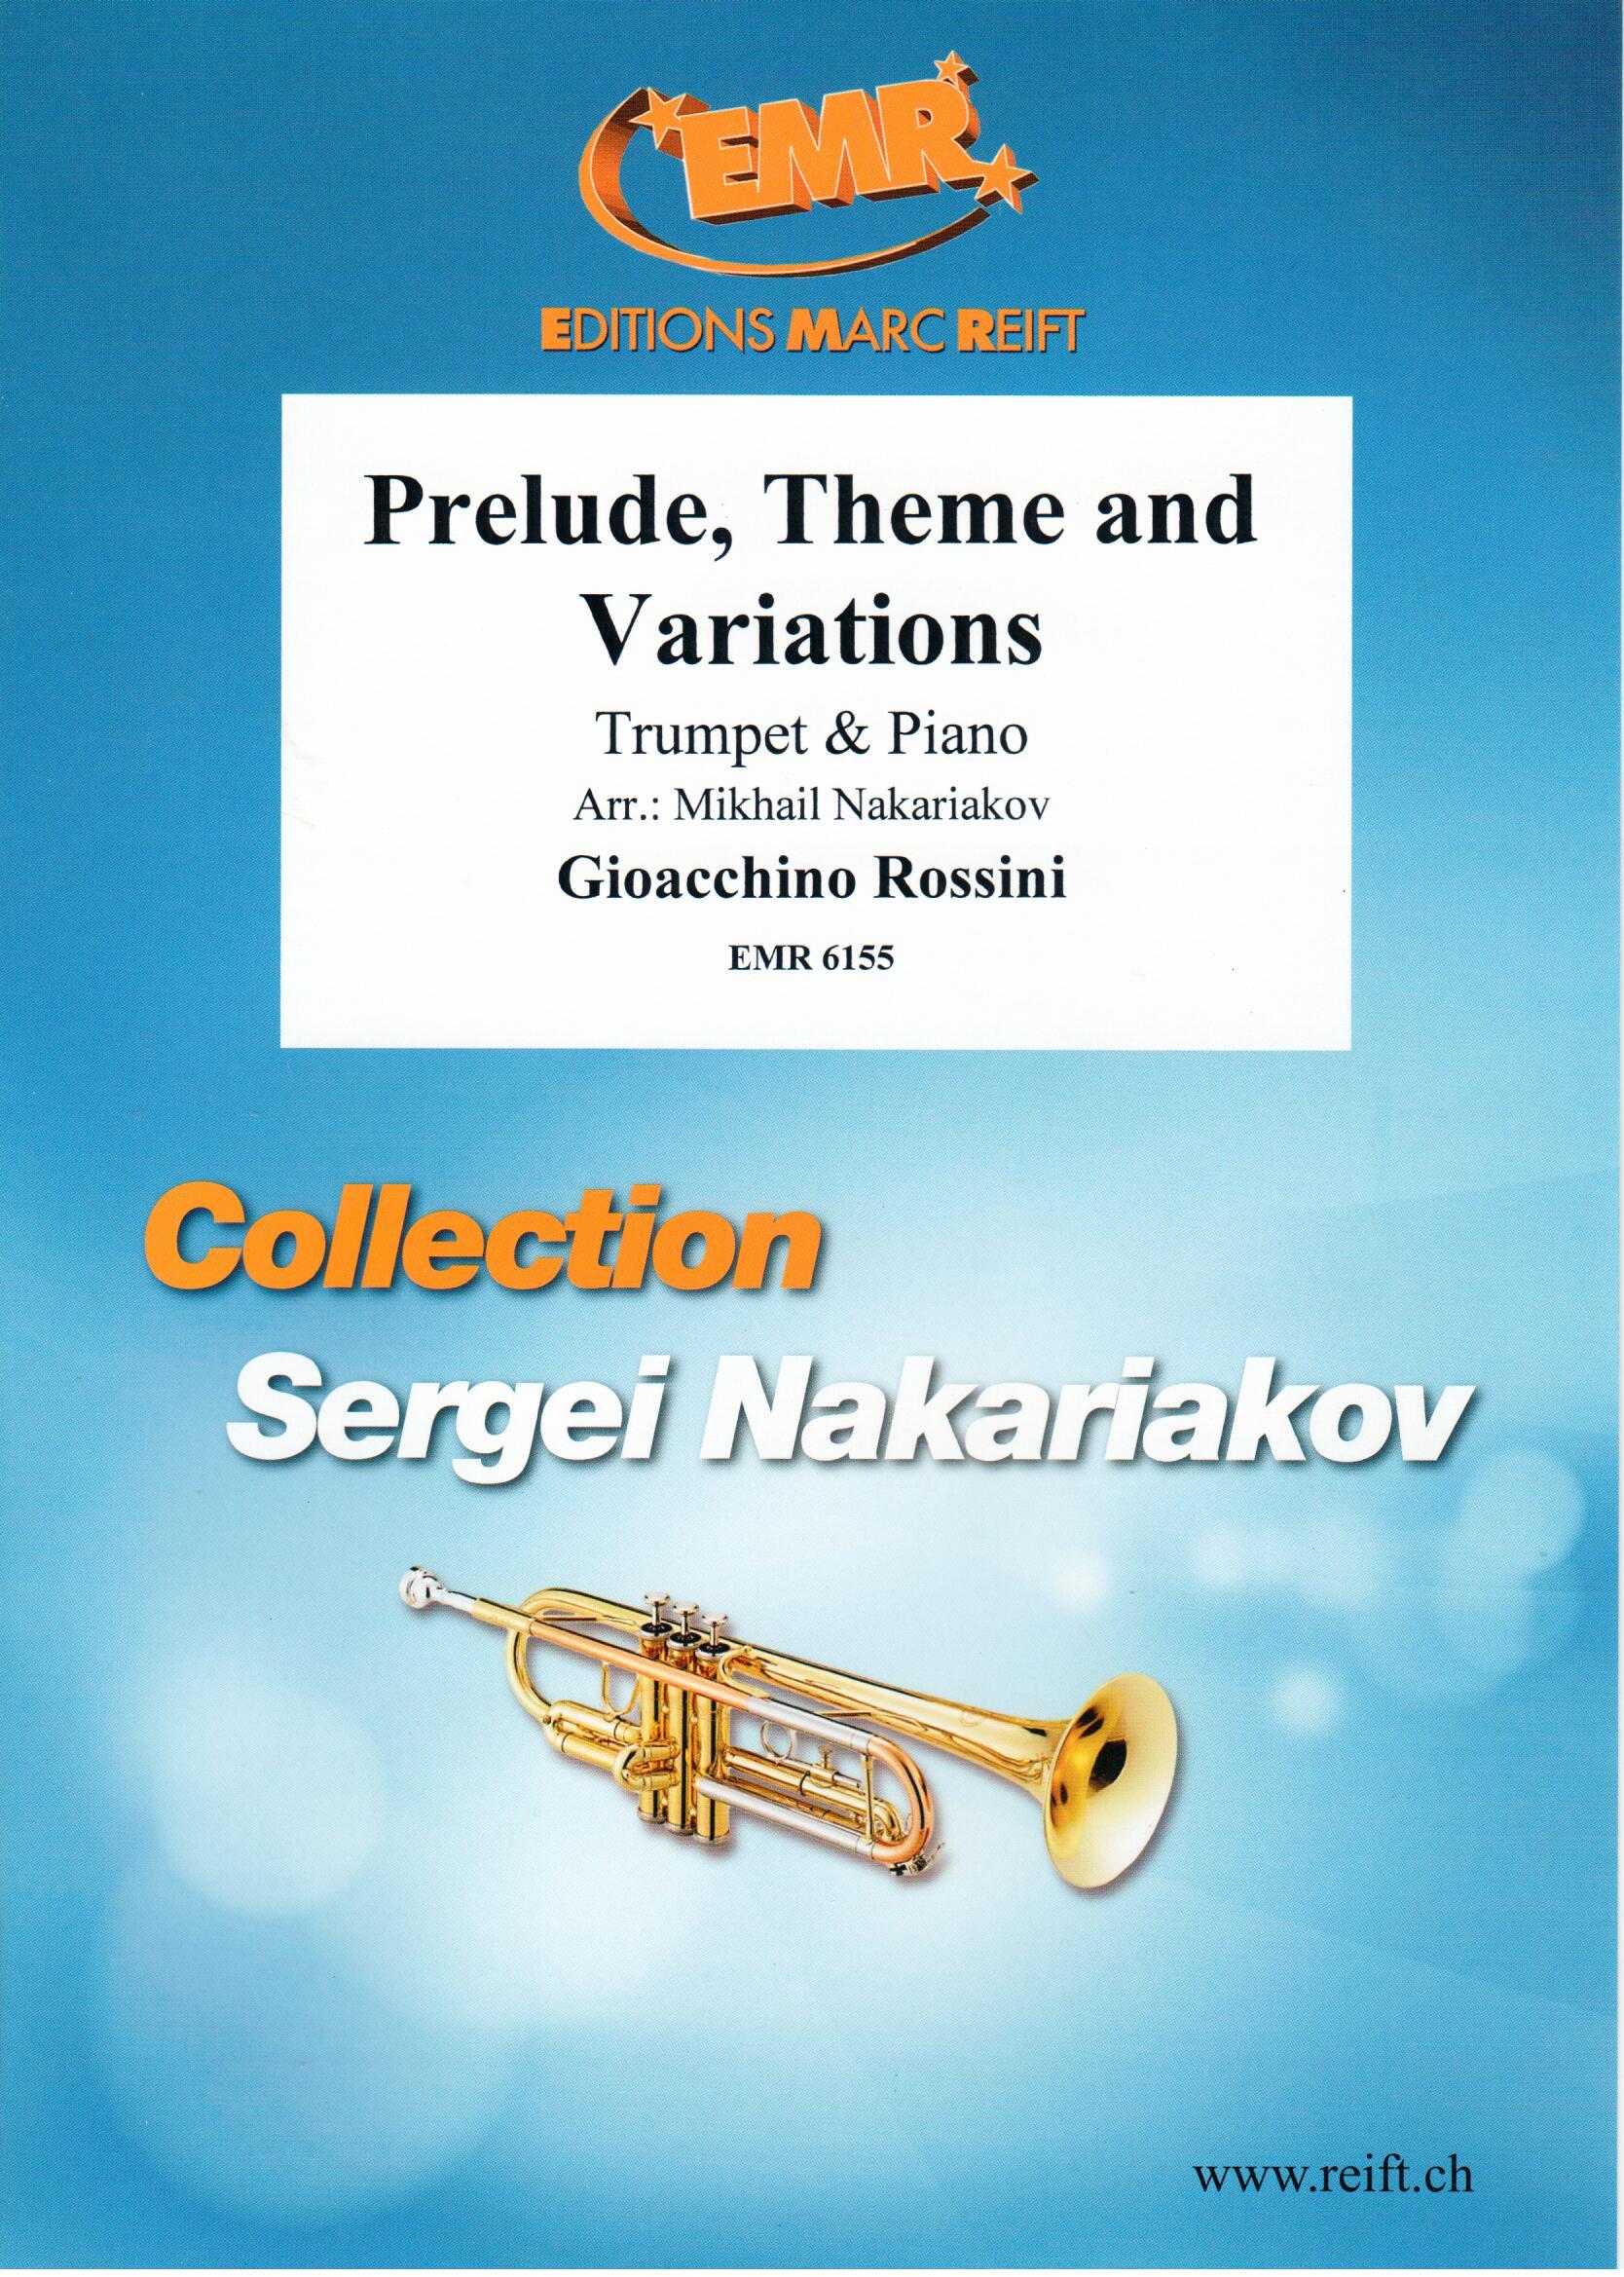 PRELUDE, THEME AND VARIATIONS